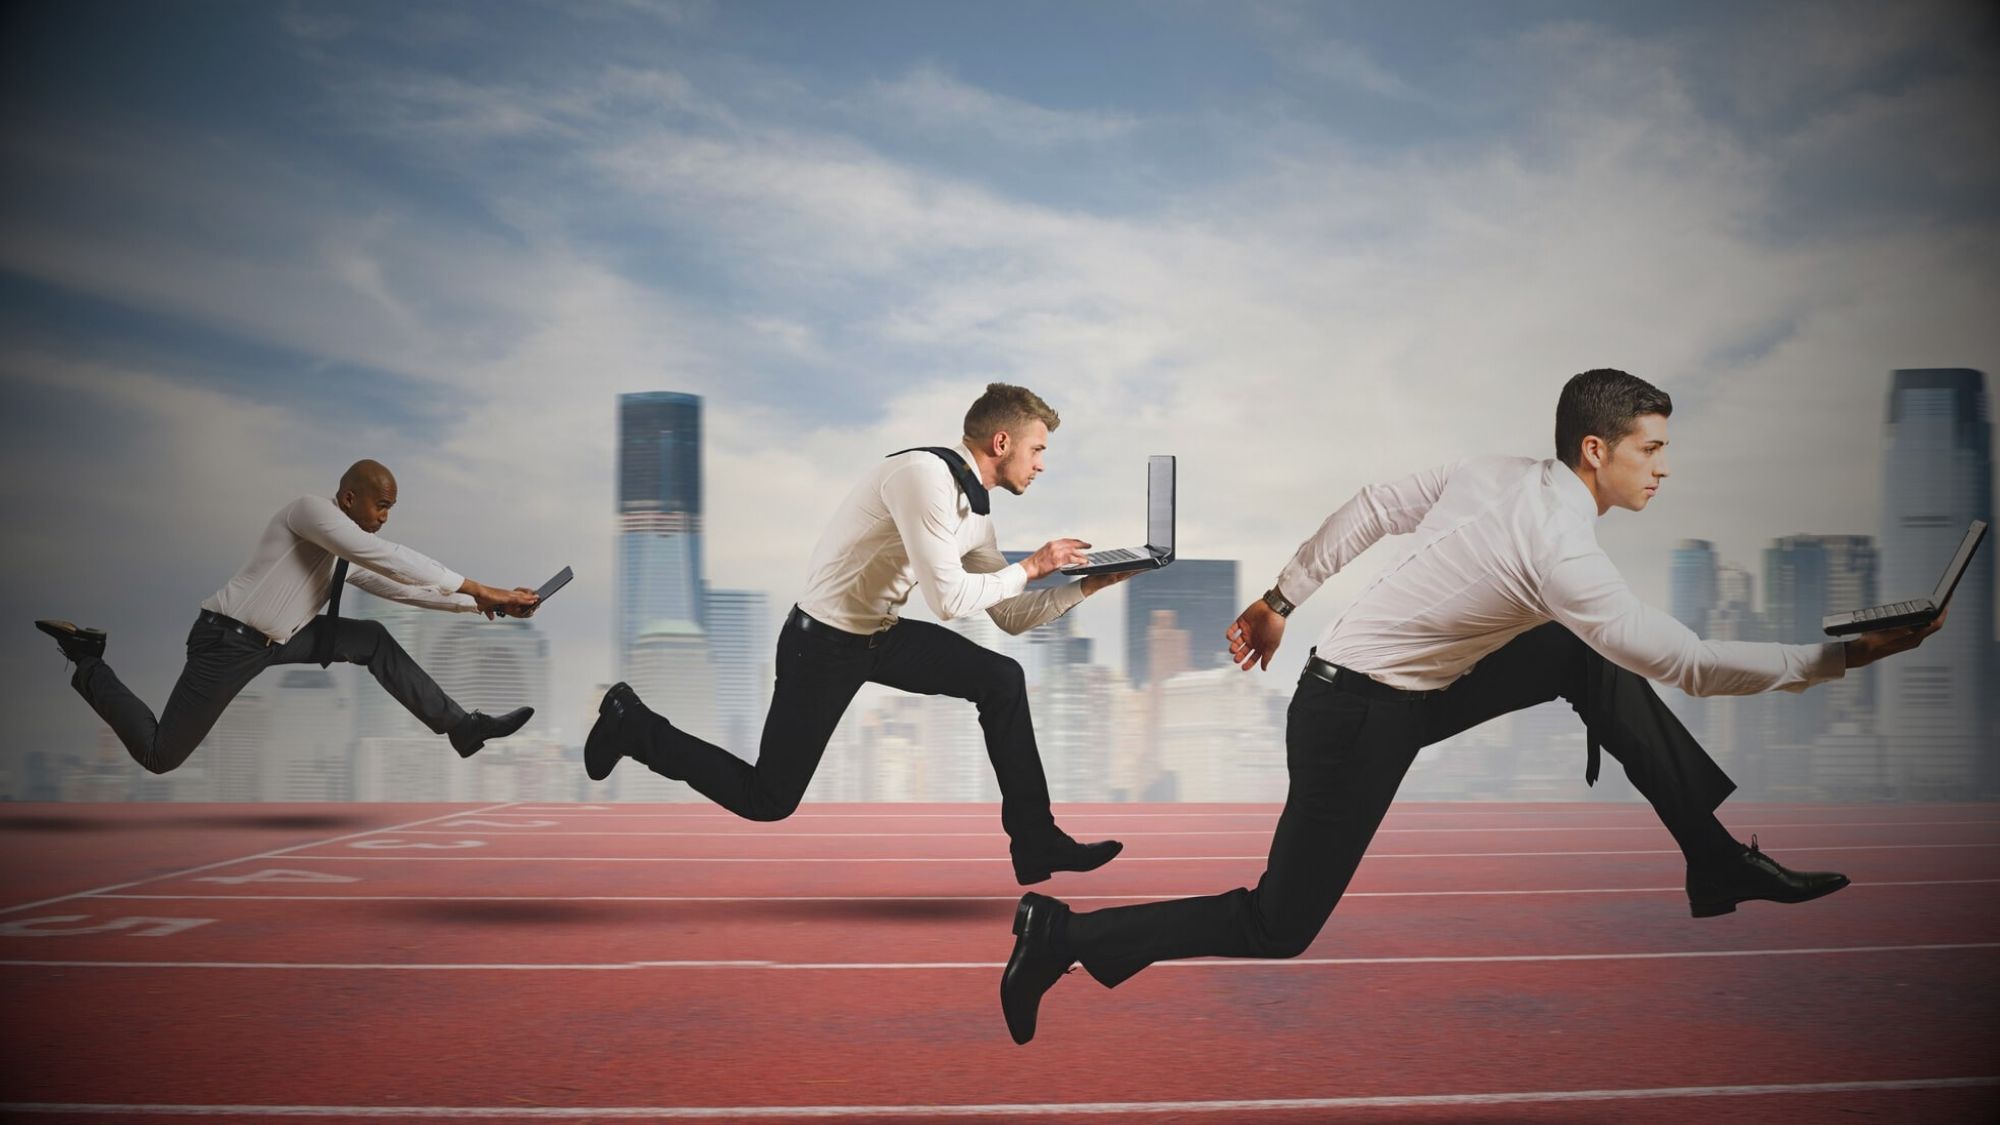 Businessmen sprinting on a track with laptops, showcasing the fast-paced nature of beating your competitor in google search